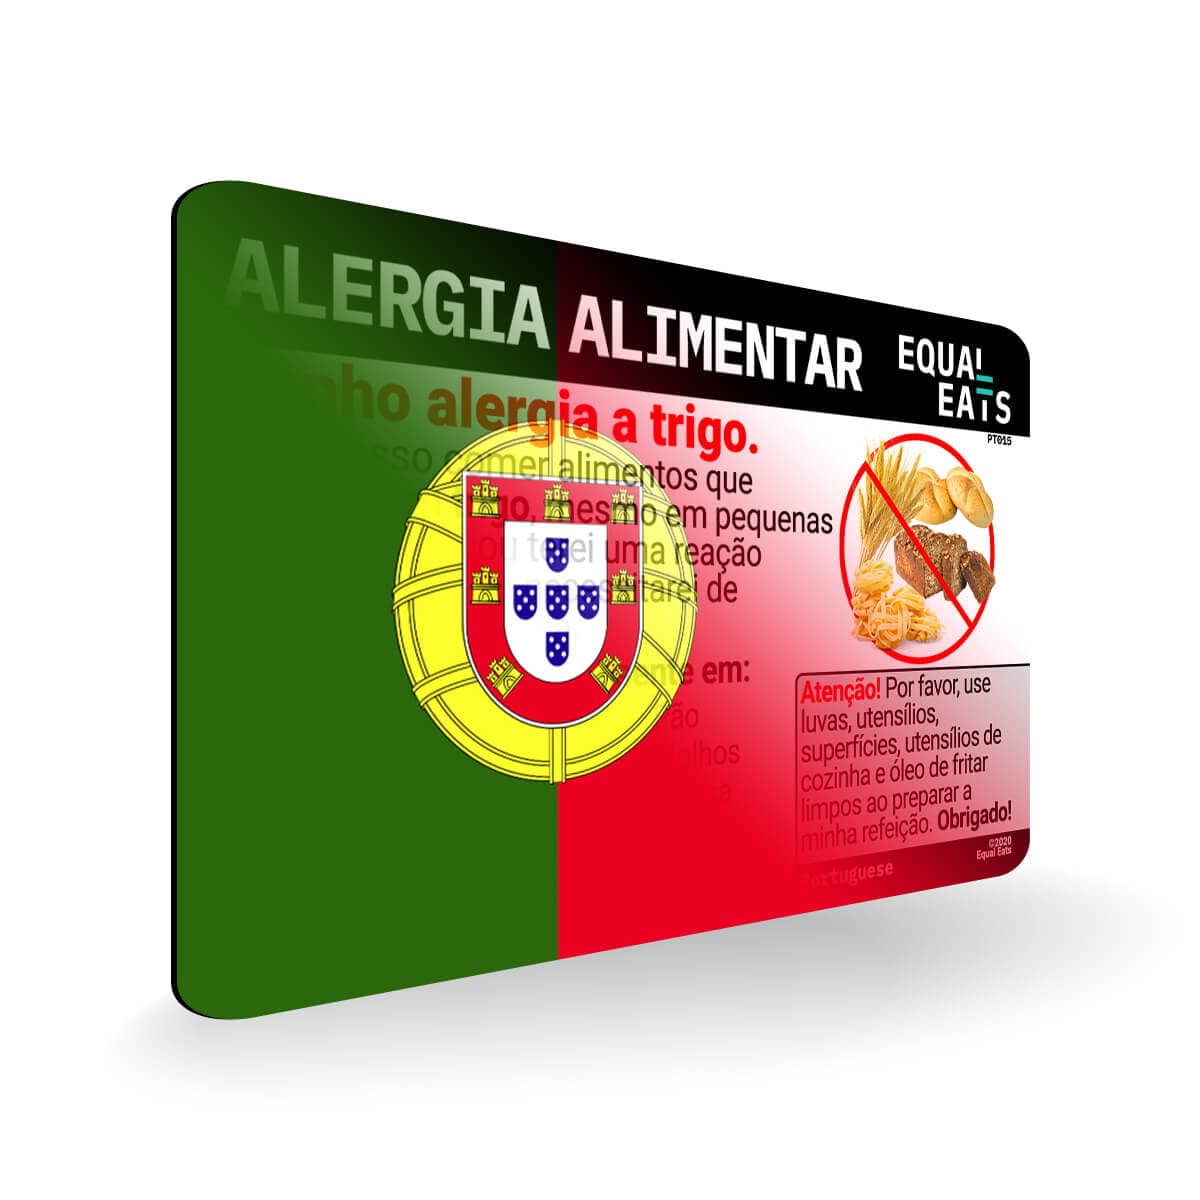 Wheat Allergy in Portuguese. Wheat Allergy Card for Portugal